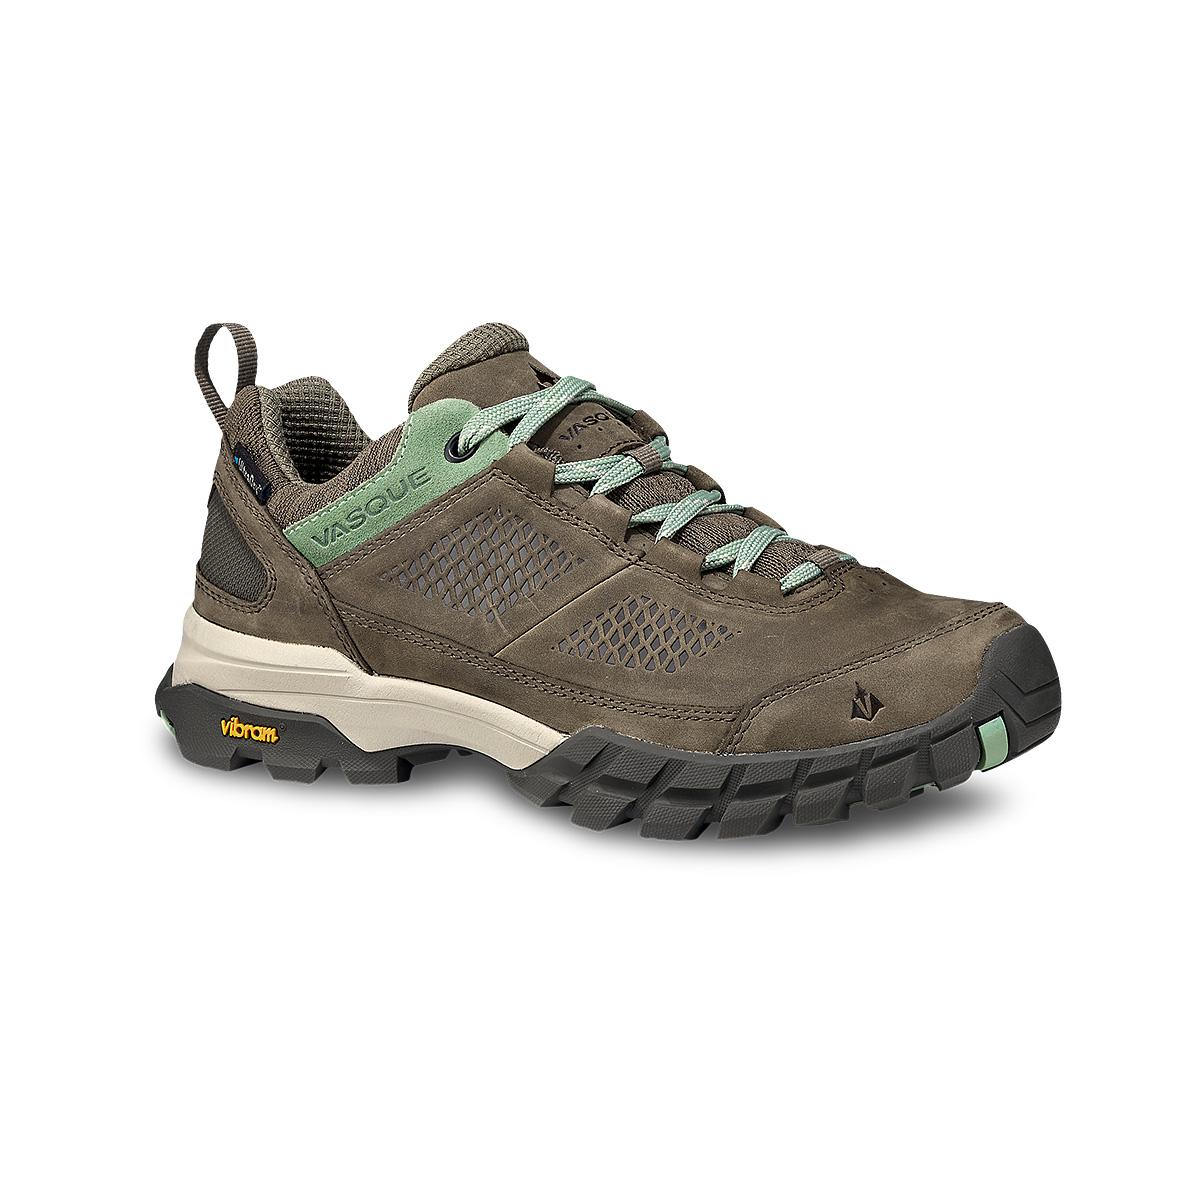  Women's Talus At Low Ultradry Shoes